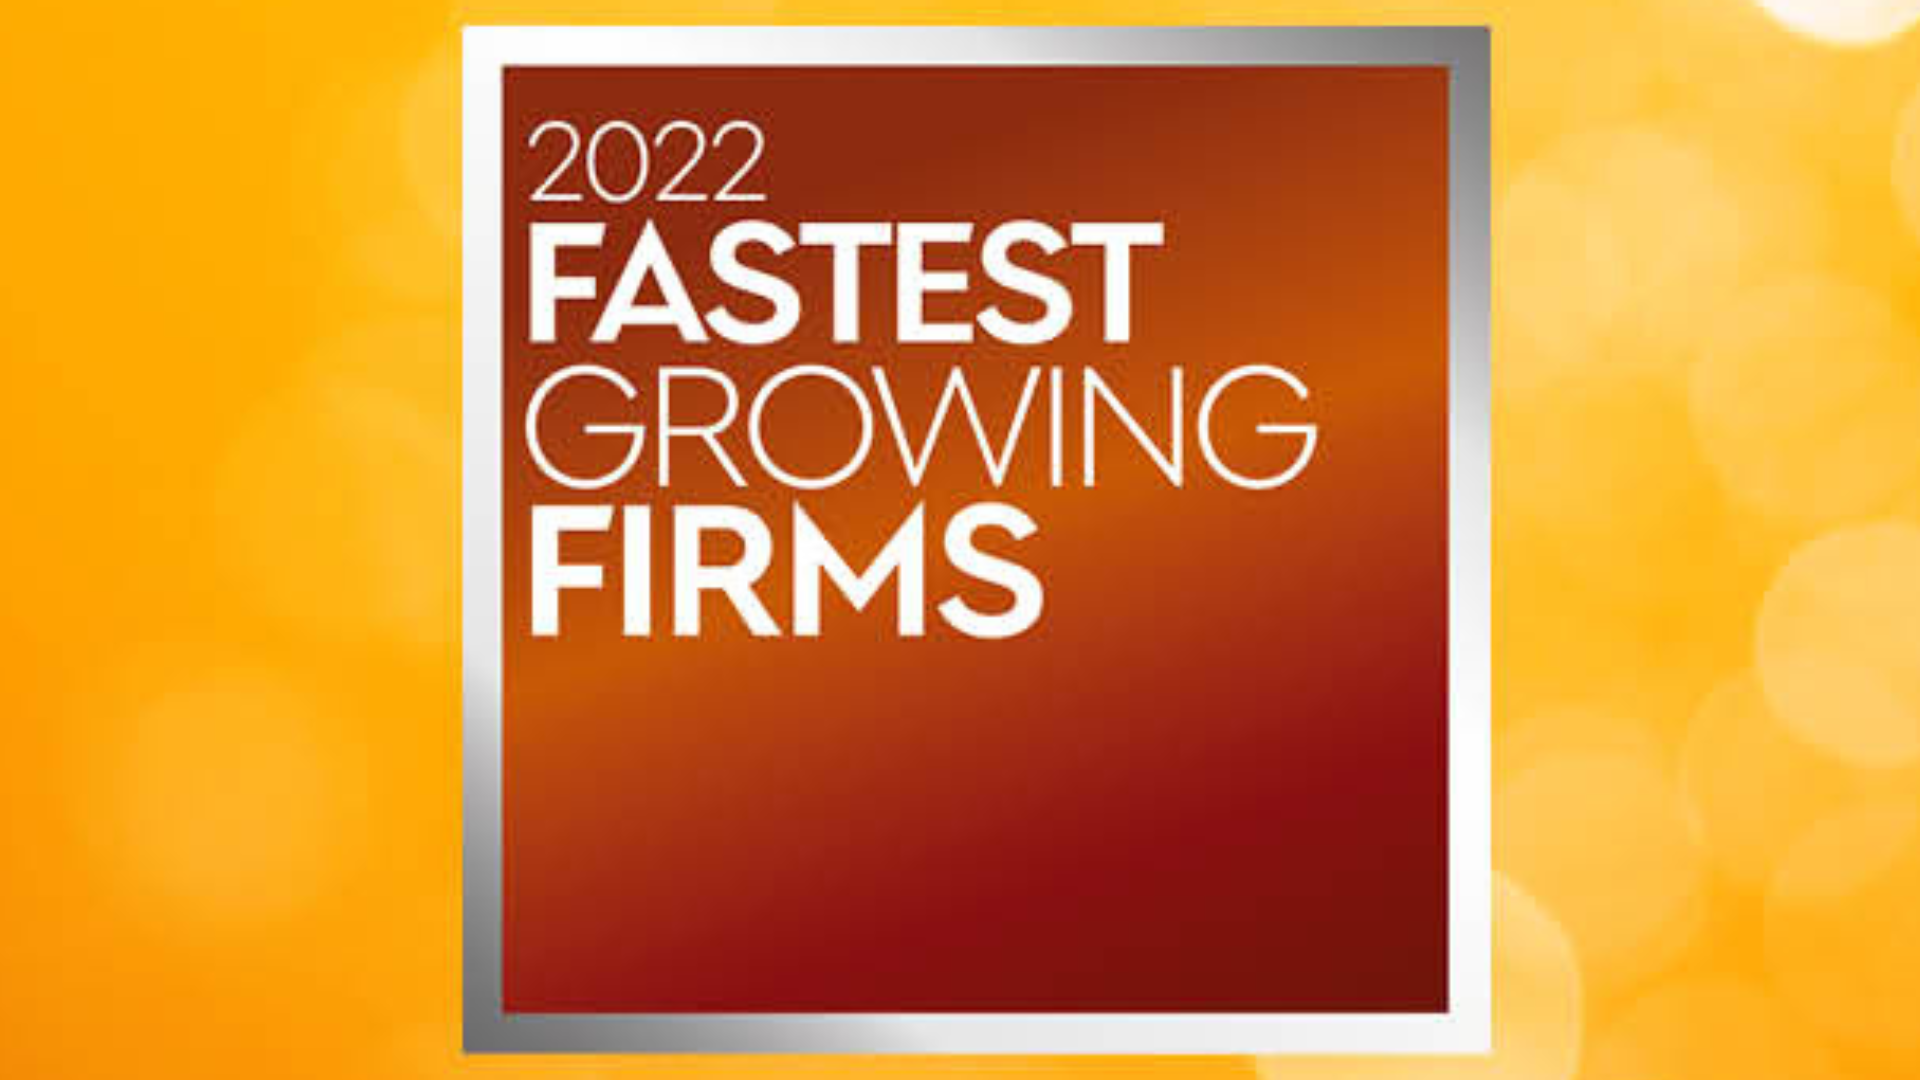 Consulting Magazine Names 26 Fastest Growing Firms for 2022